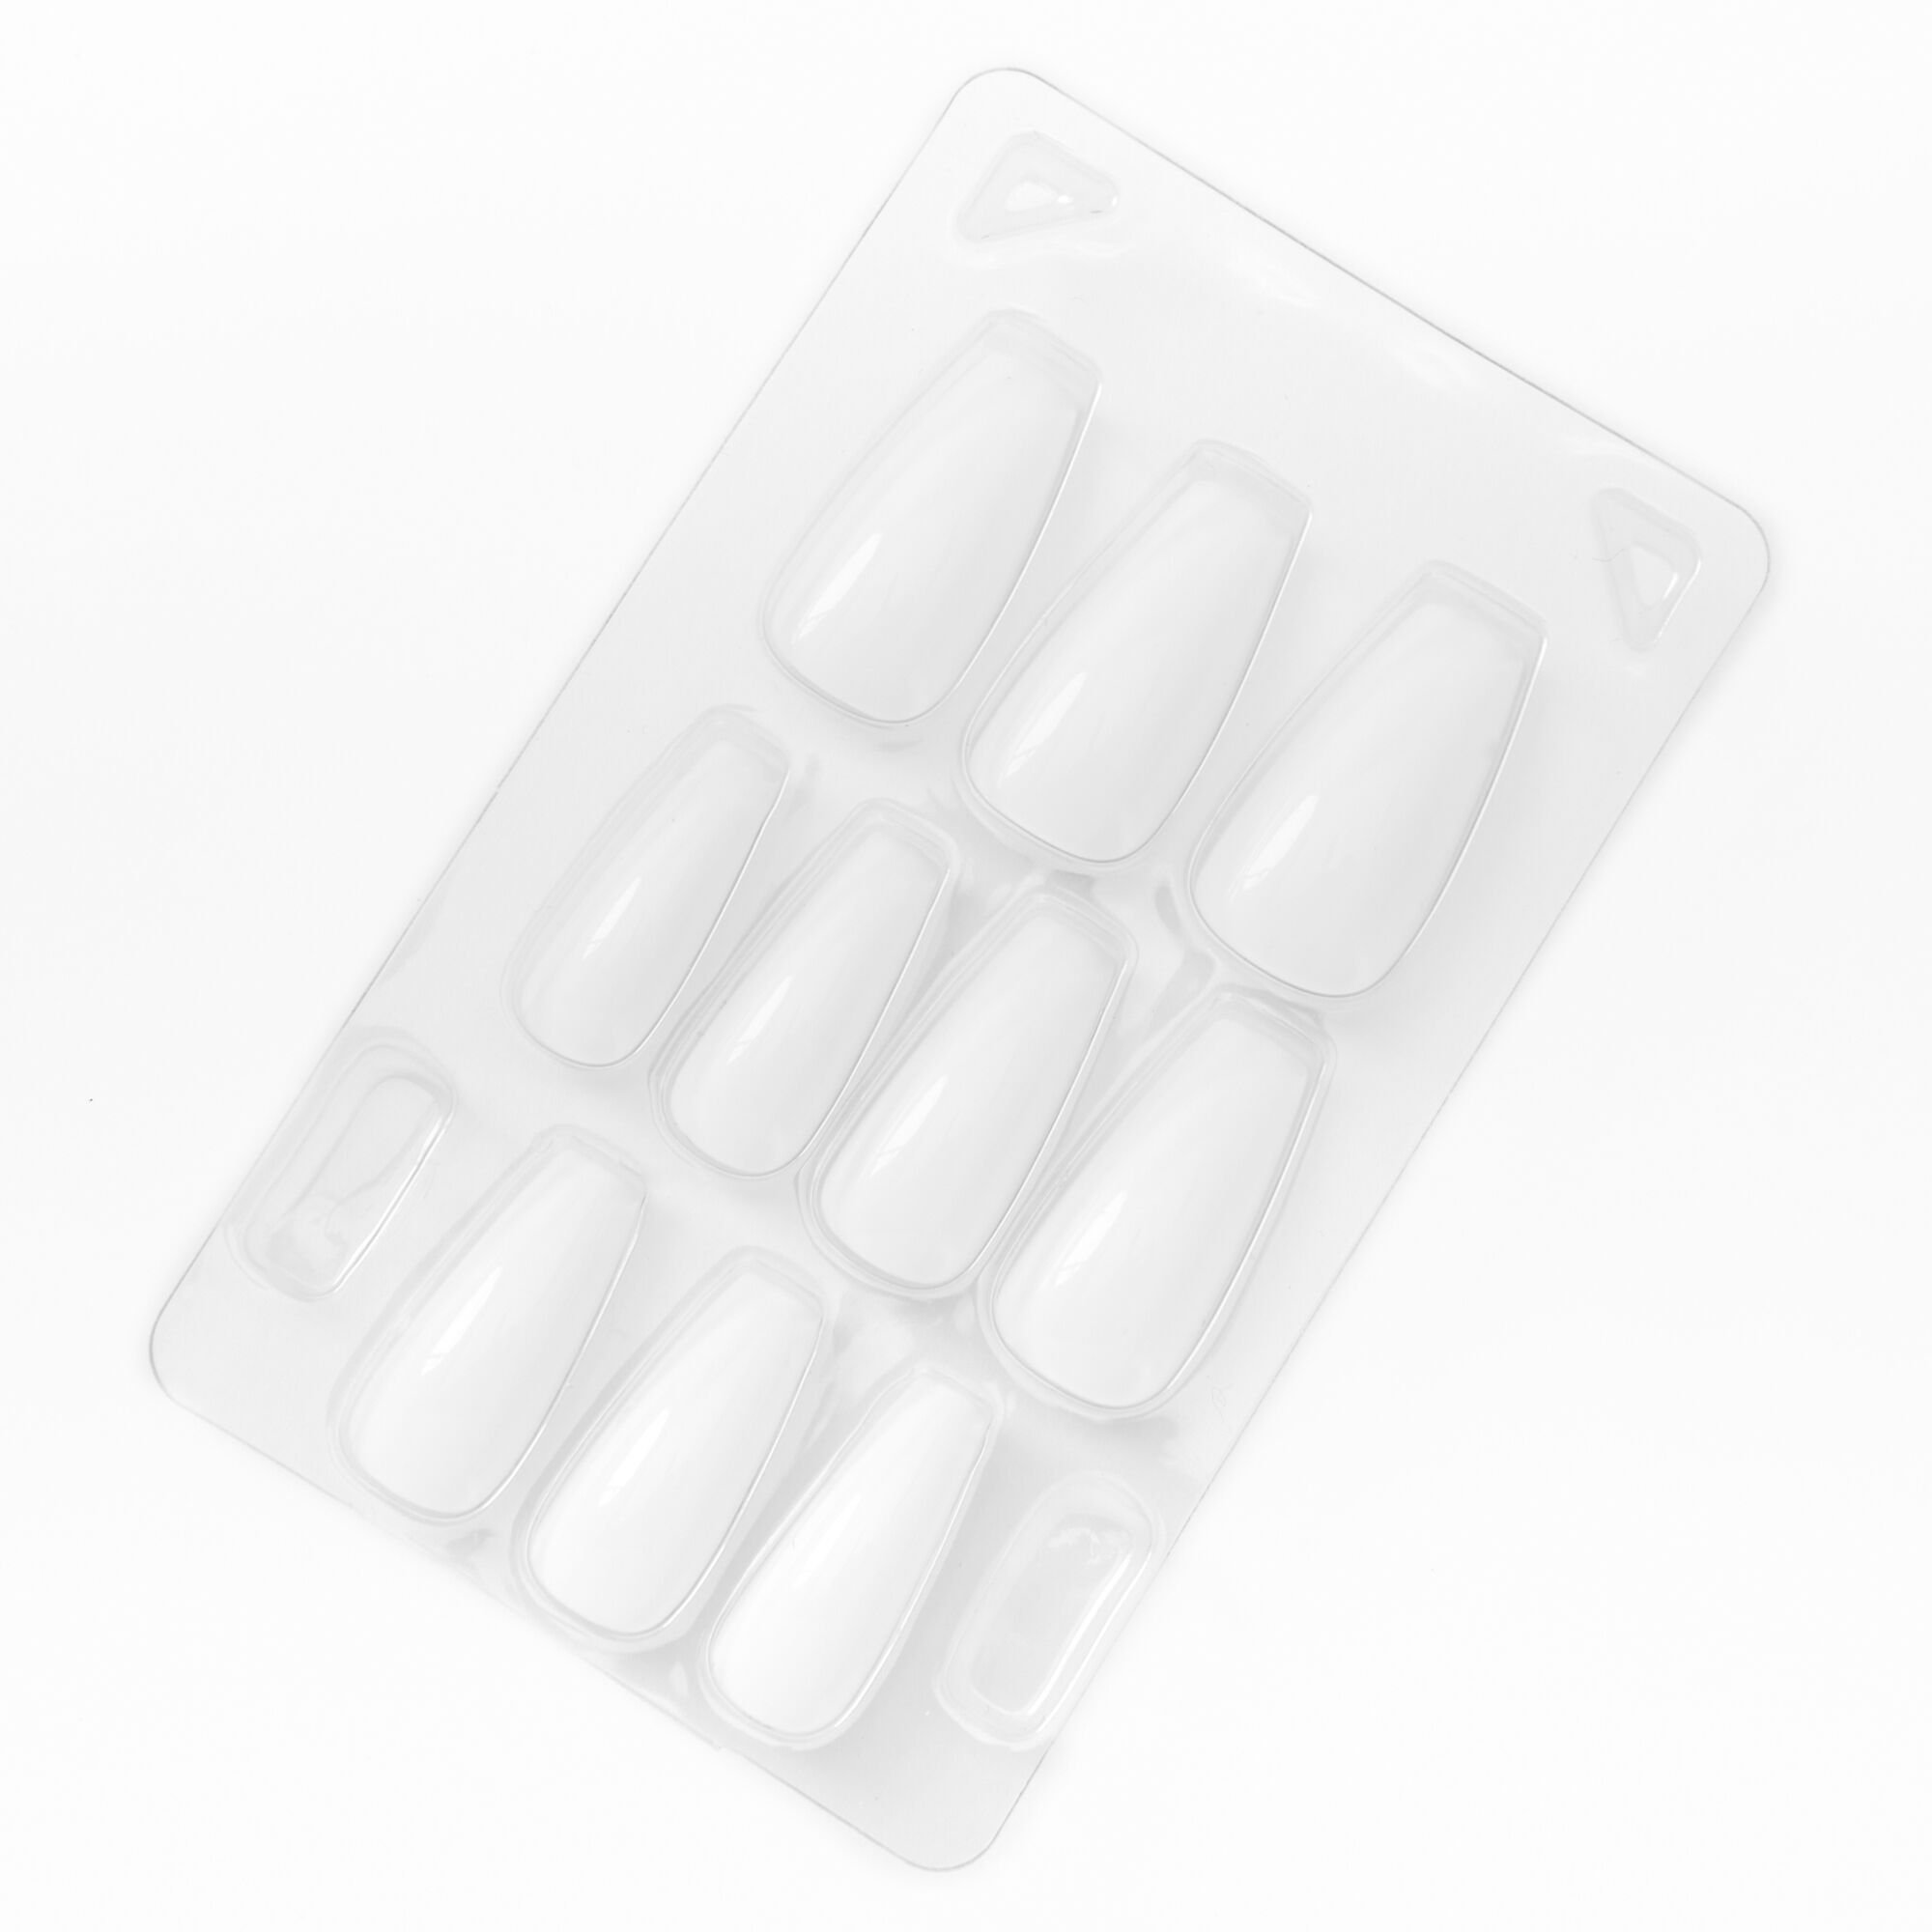 View Claires Glossy Squareletto Press On Vegan Faux Nail Set 24 Pack White information